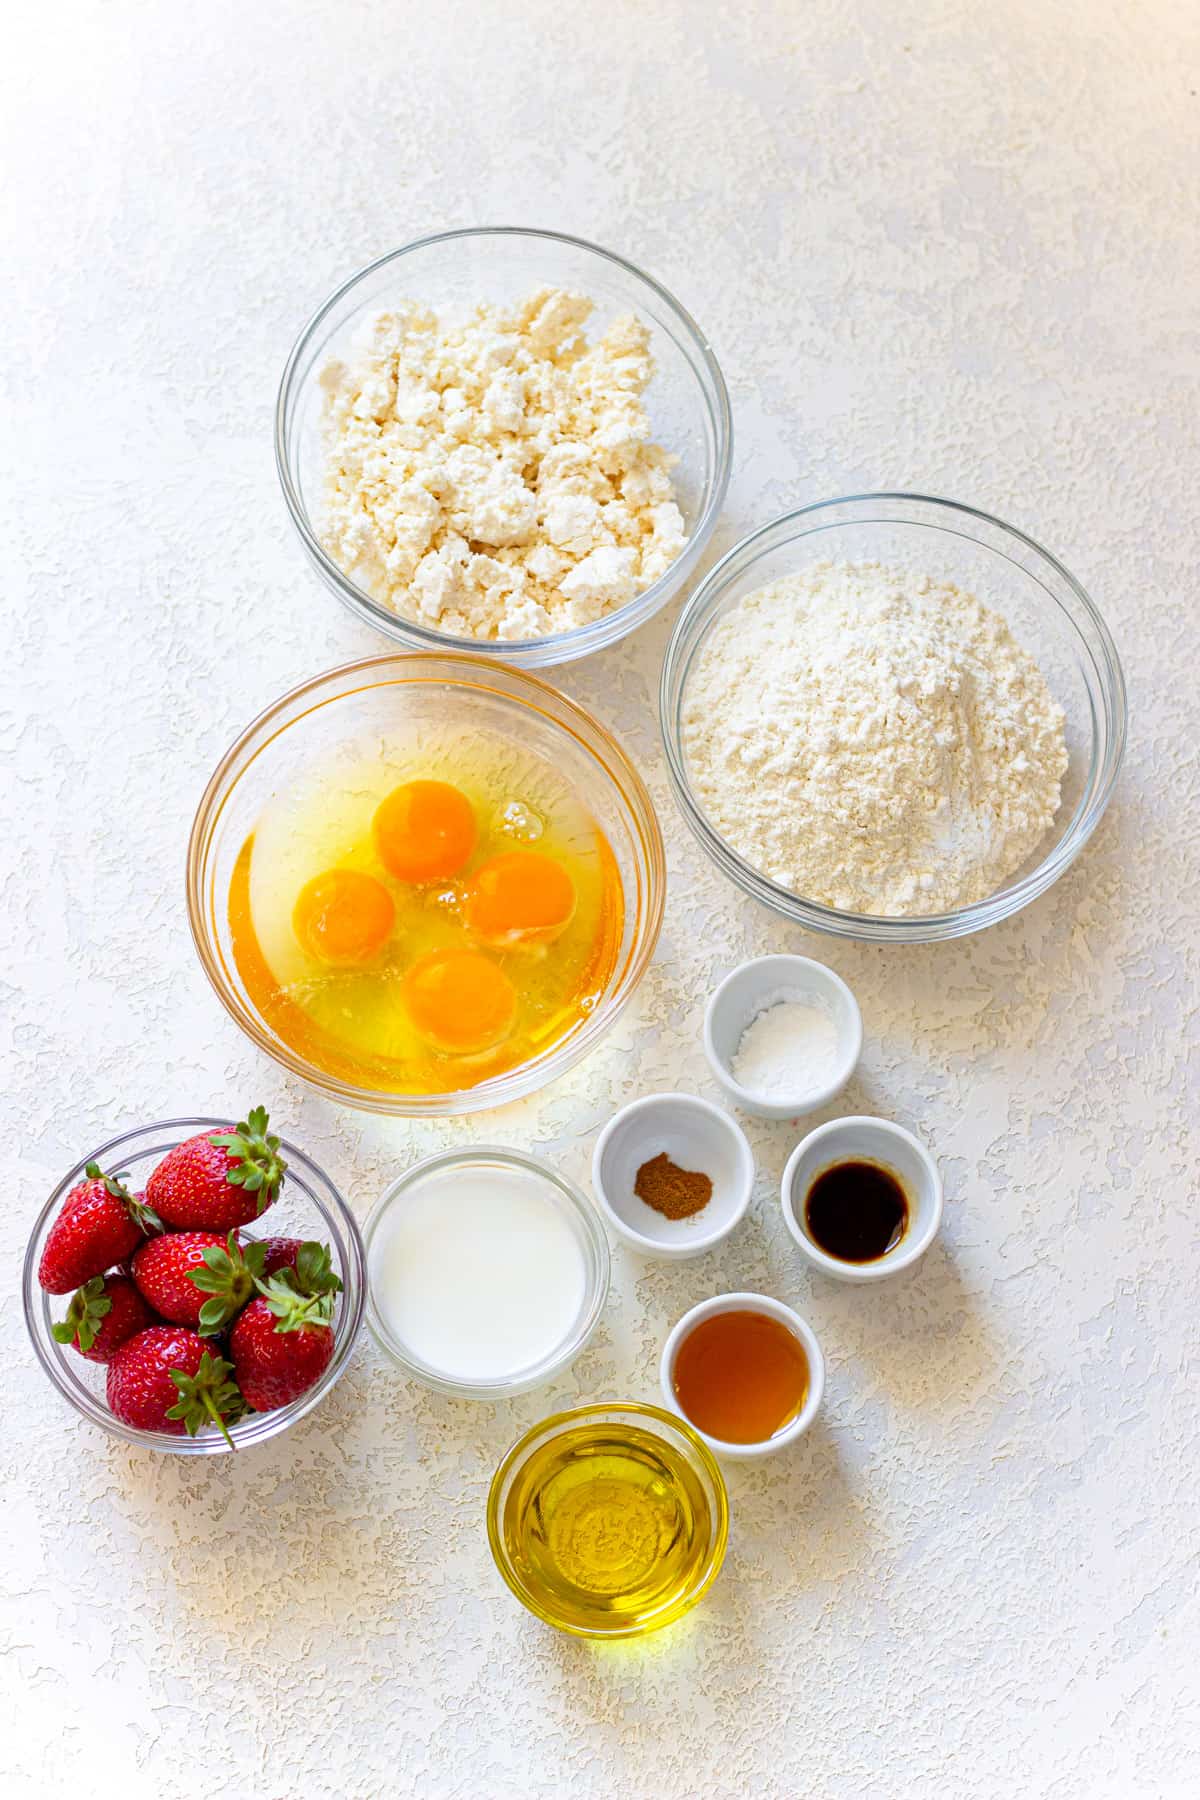 Ingredients for cottage cheese pancakes.